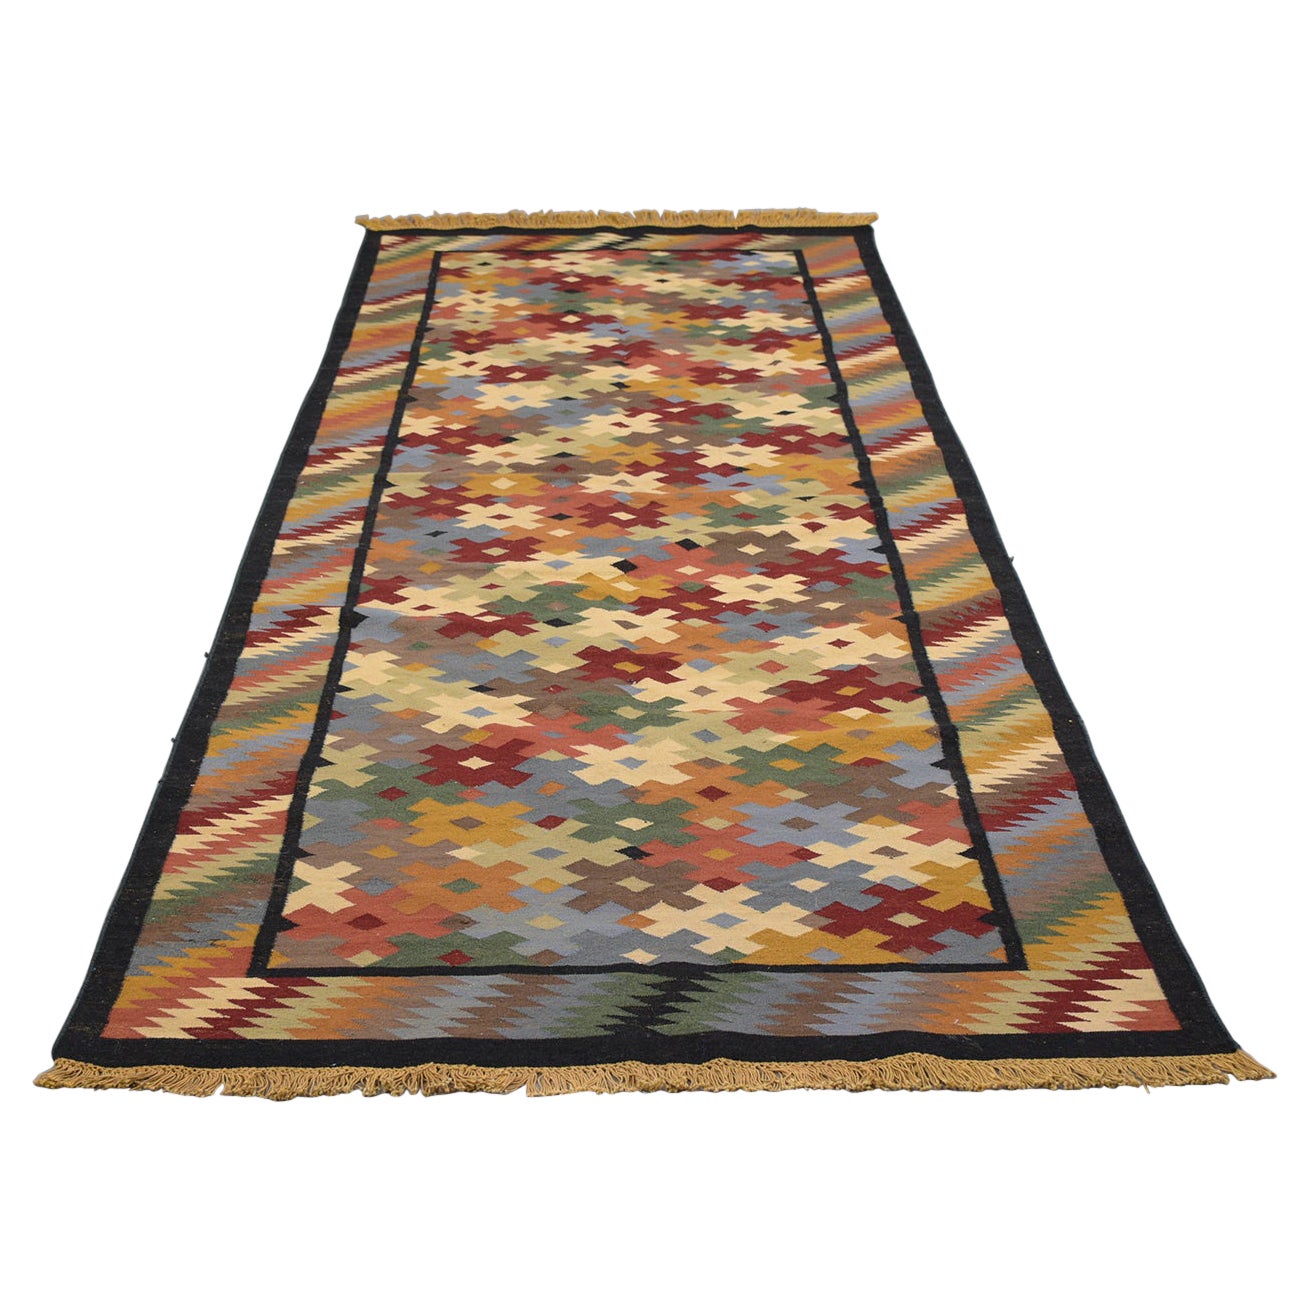 Early 1900s Multicolor Symmetrical Pattern Textile Rug For Sale